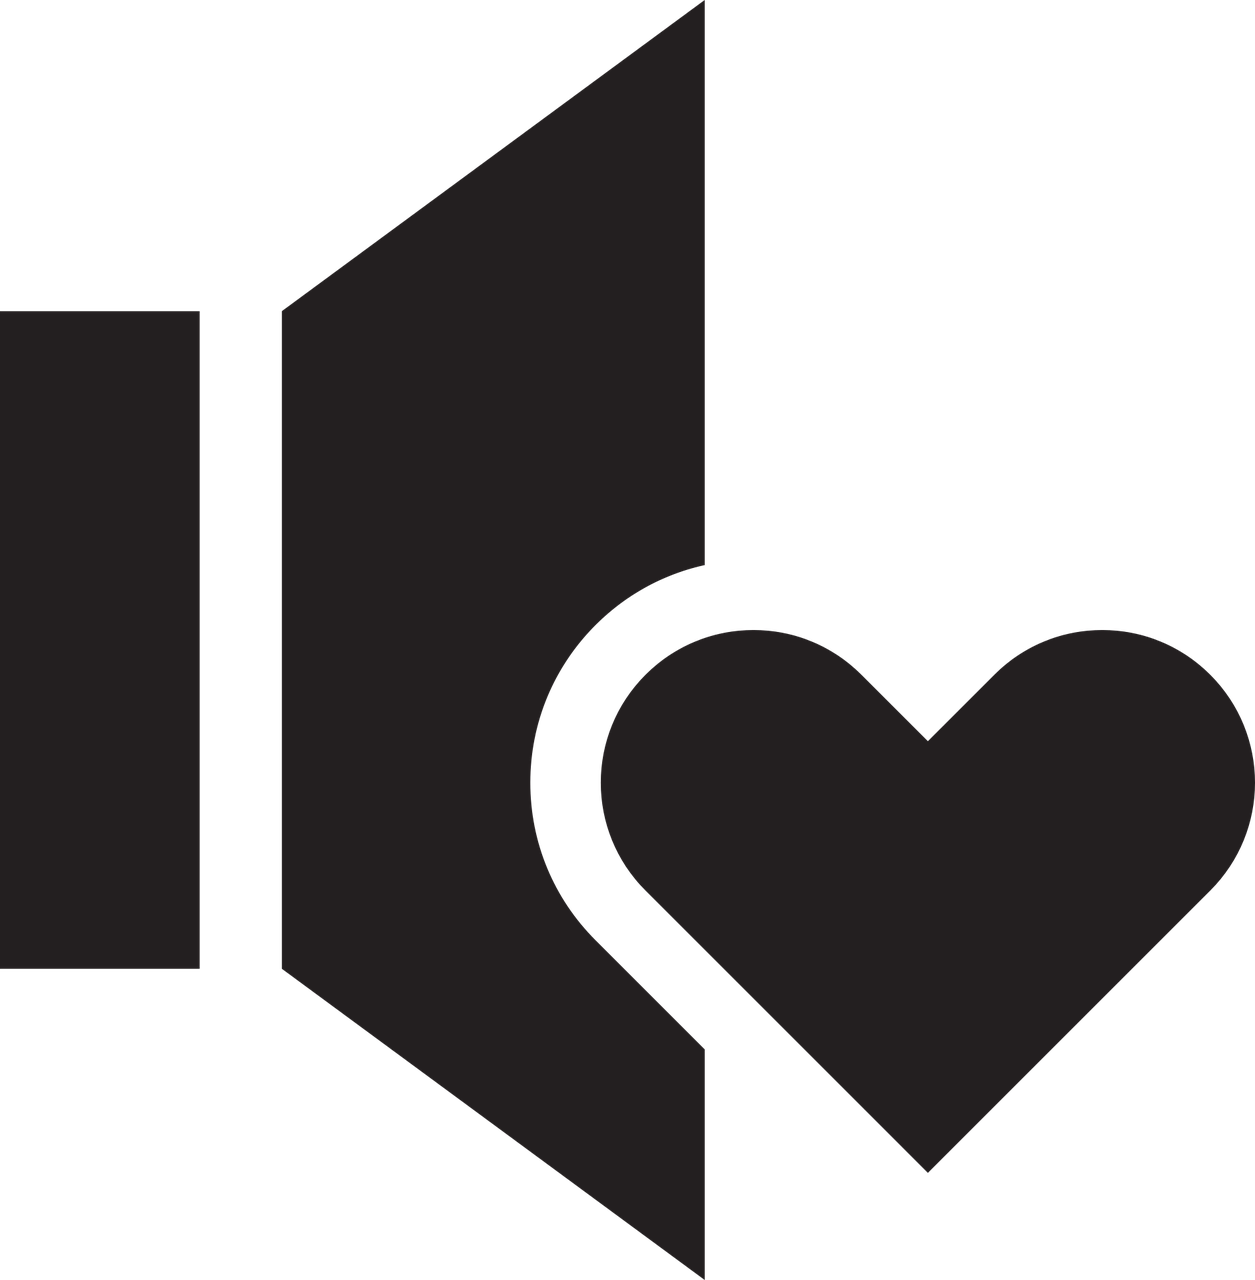 a black and white logo with a heart, a picture, inspired by Kees Bol, deviantart, bauhaus, half life logo on chest, 1 2 k, dark backround, pictured from the shoulders up